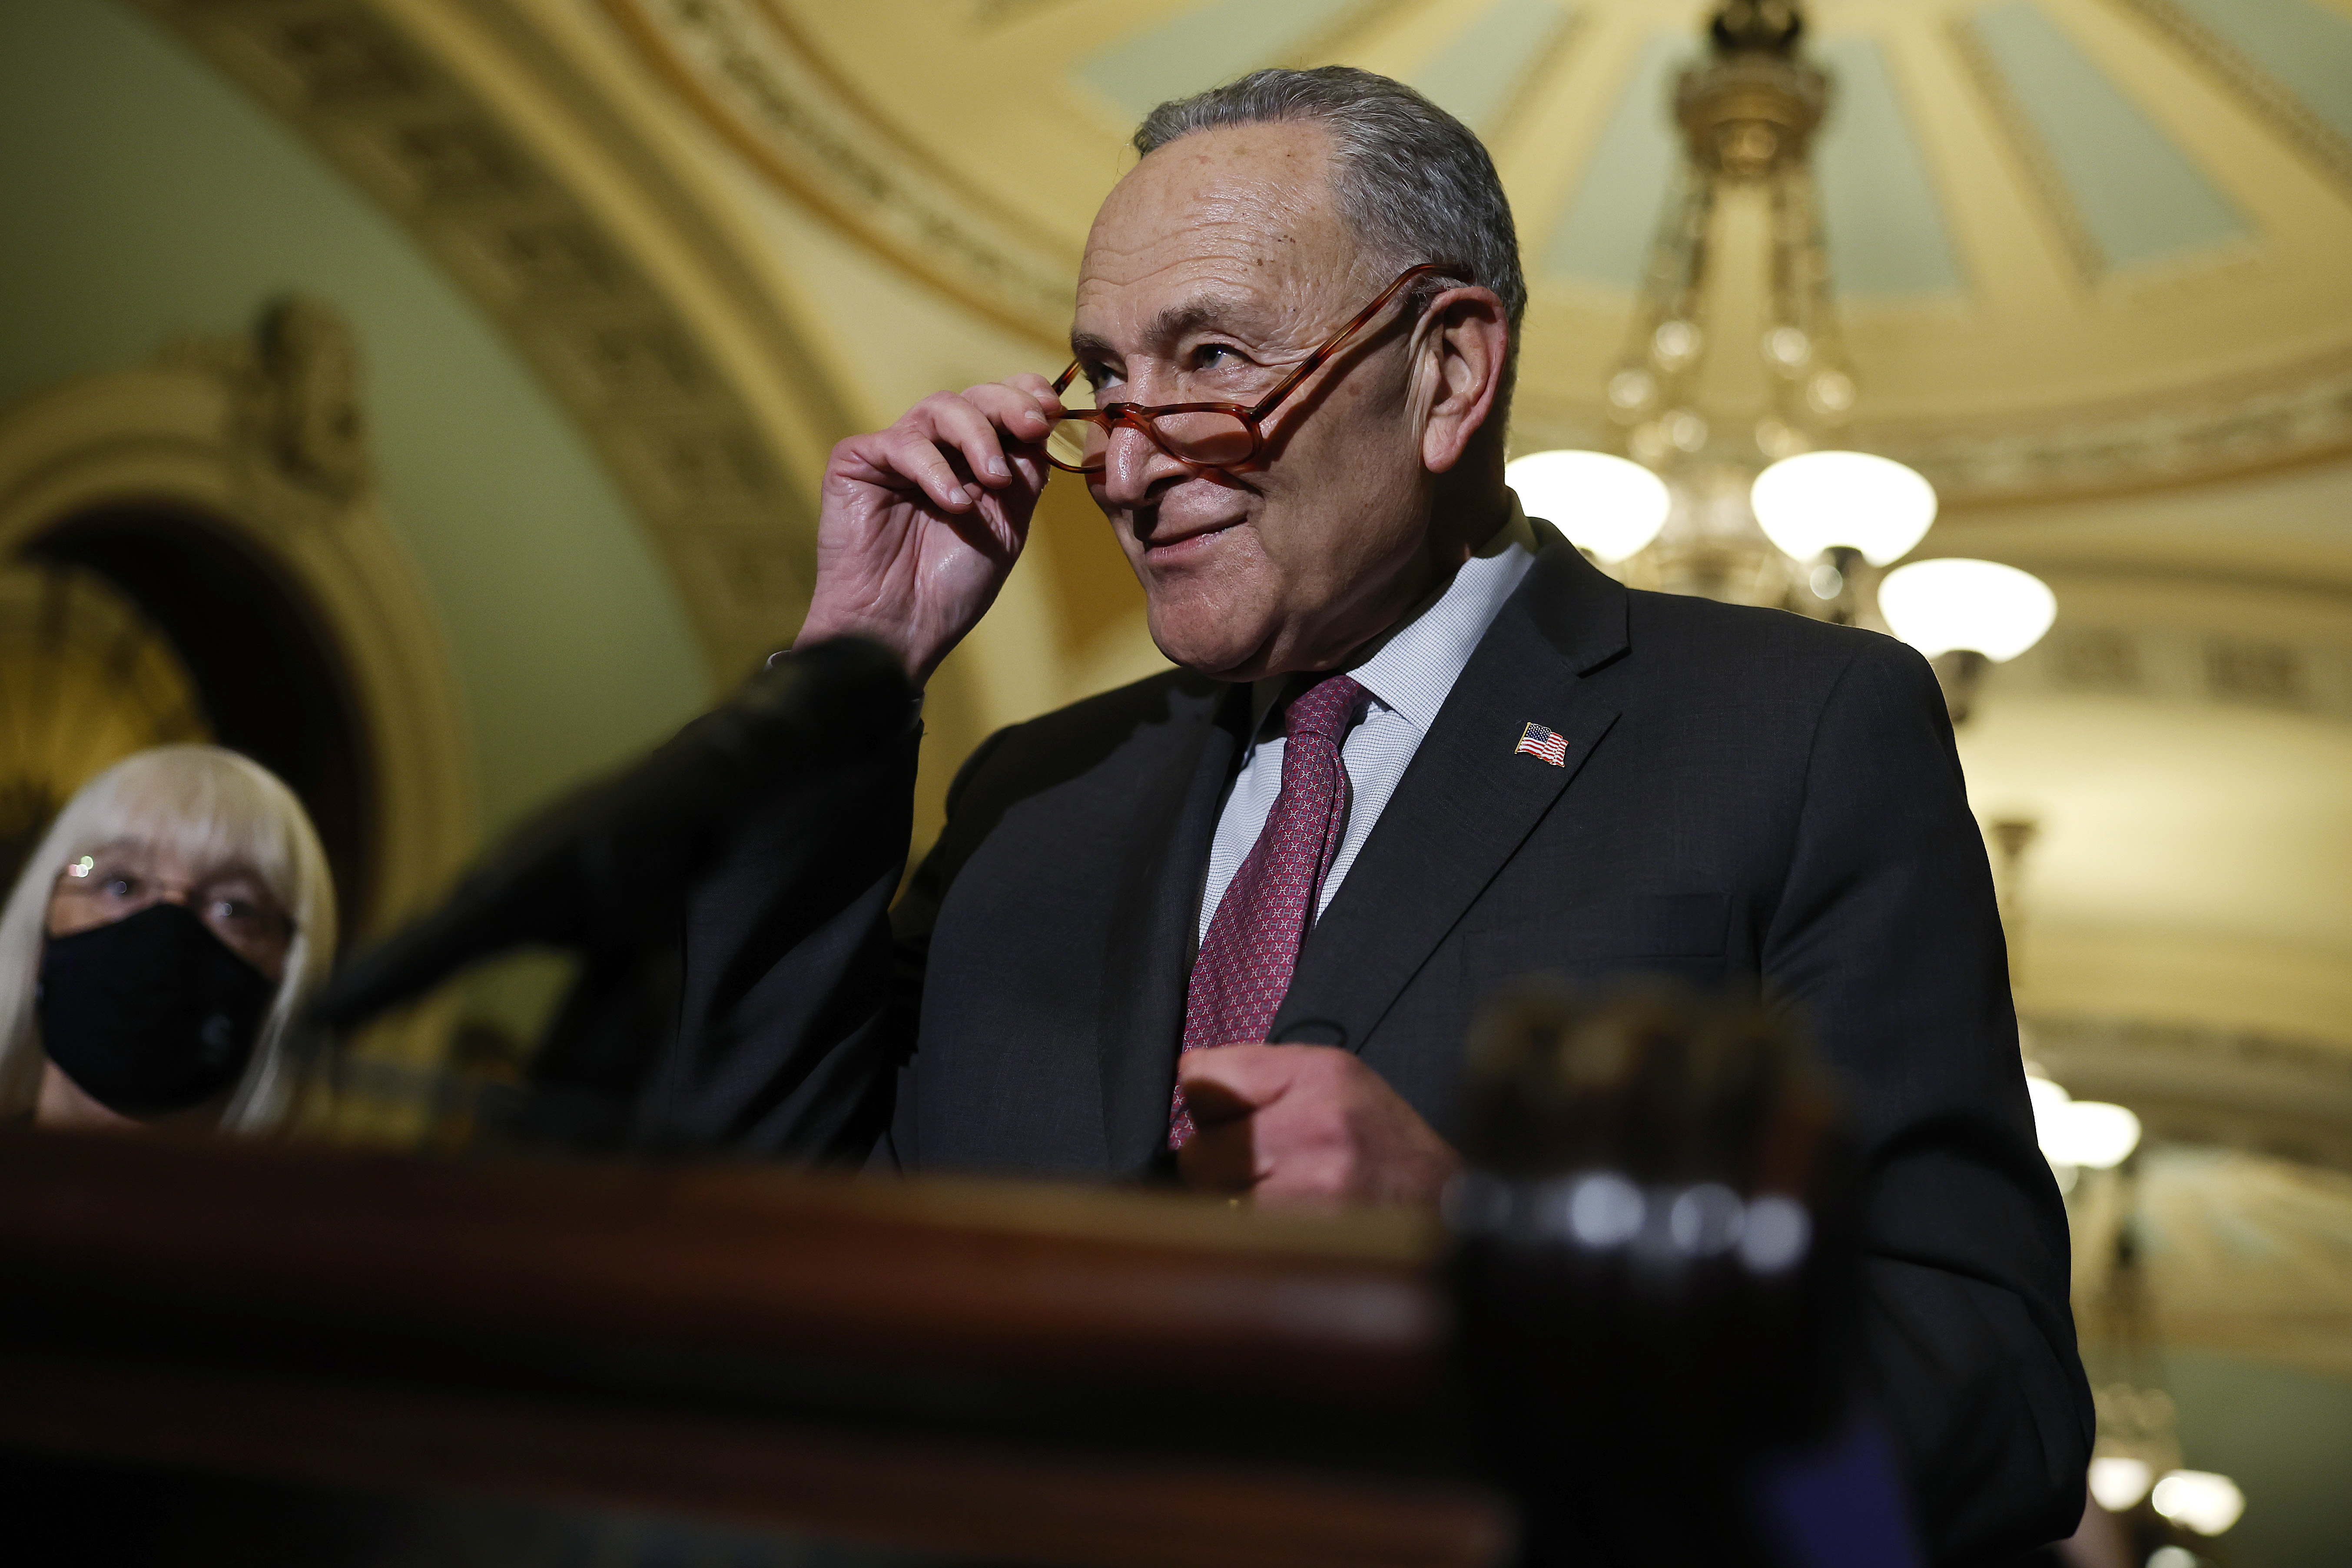 Senate Majority Leader Chuck Schumer adjusts his glasses as he speaks to reporters on Capitol Hill.